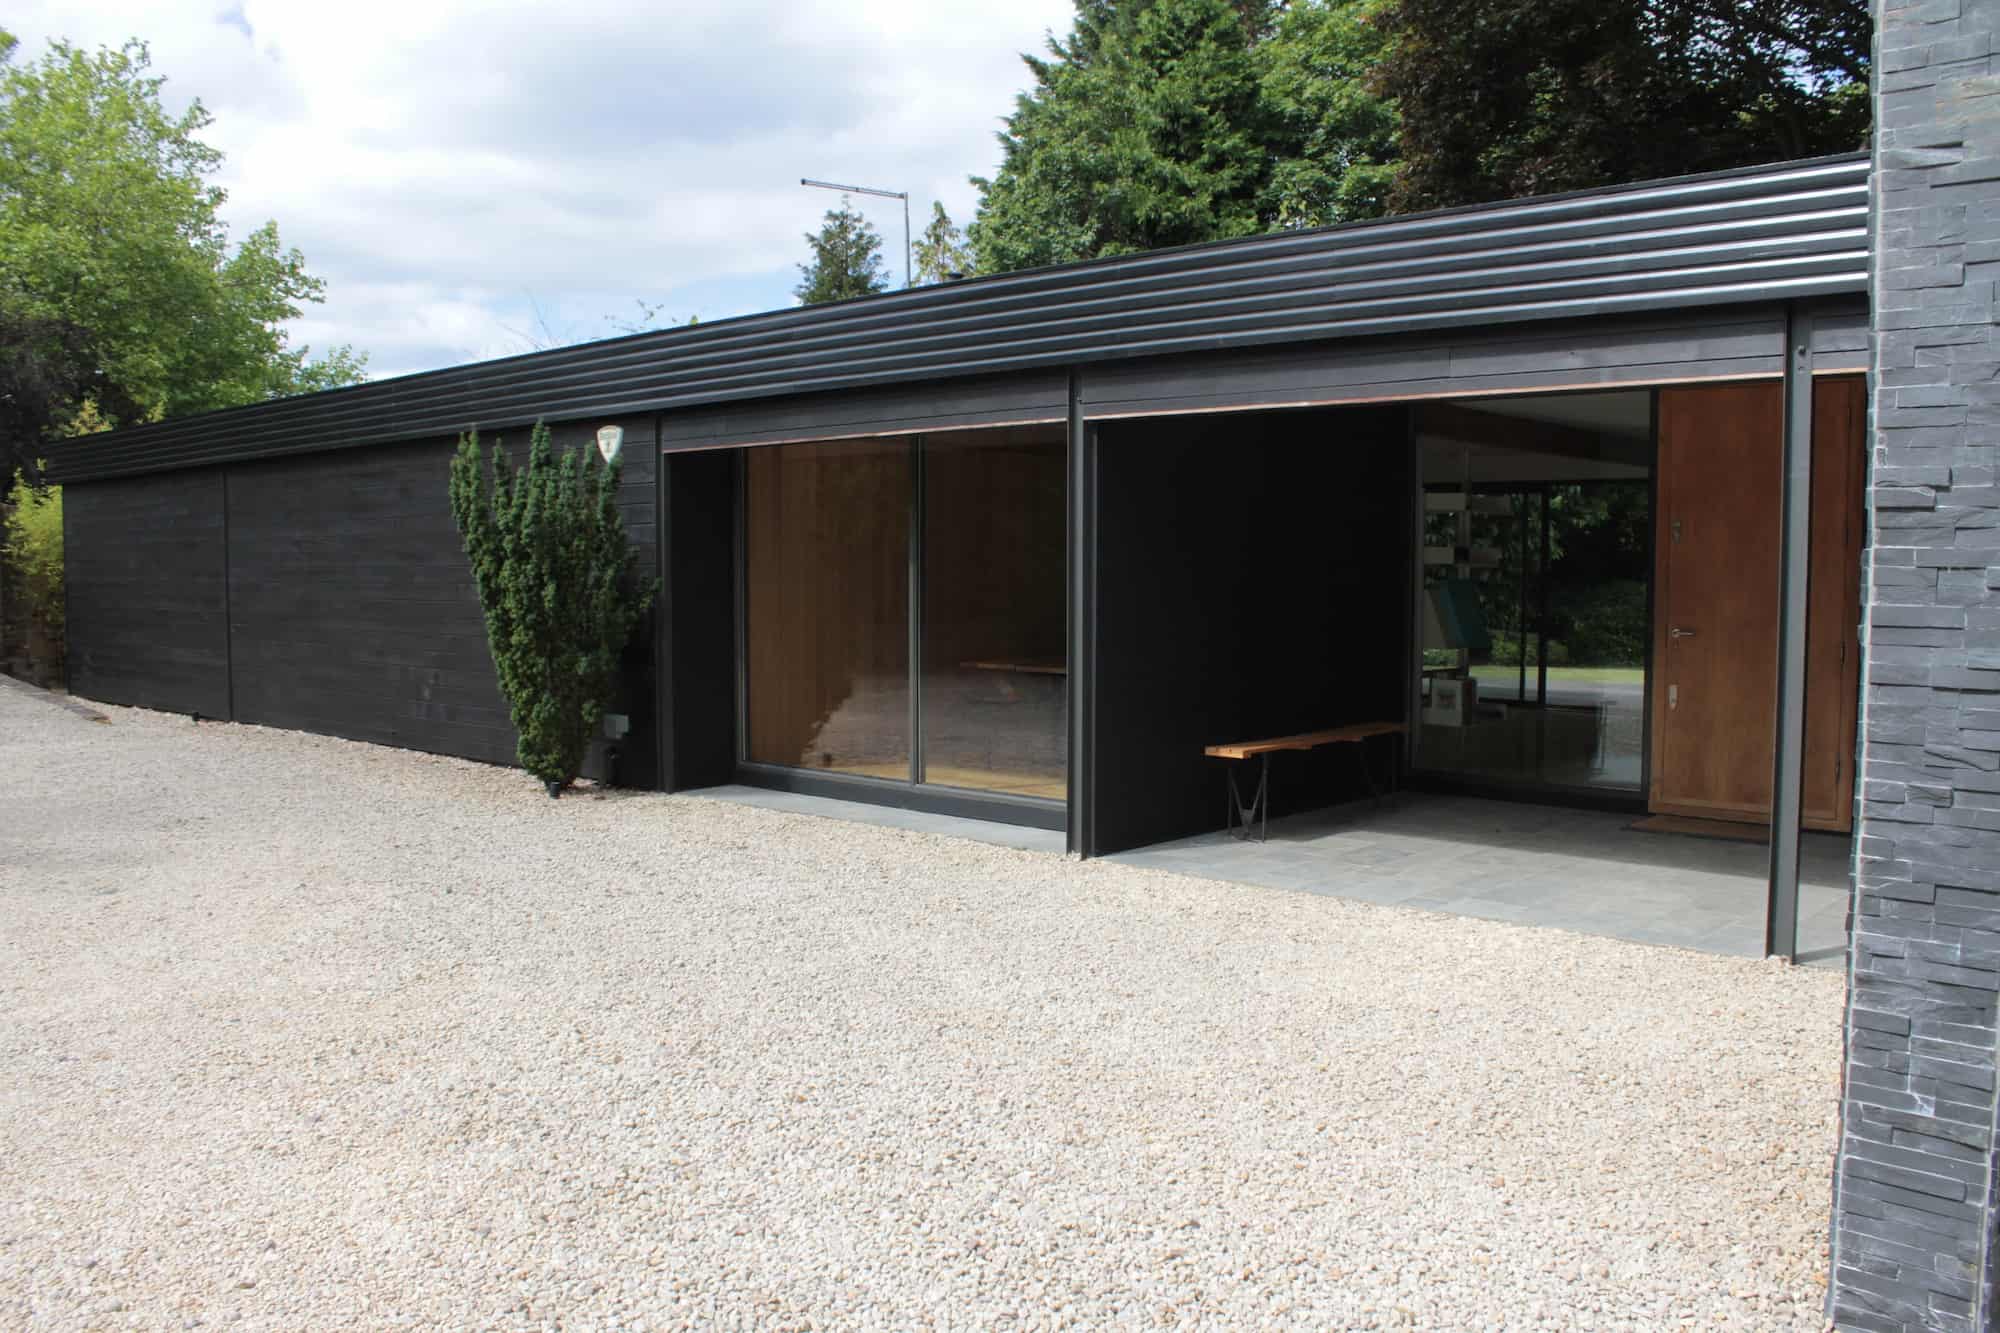 Dower SL2 - A contemporary single storey property with large expanses of glass - The Location Guys